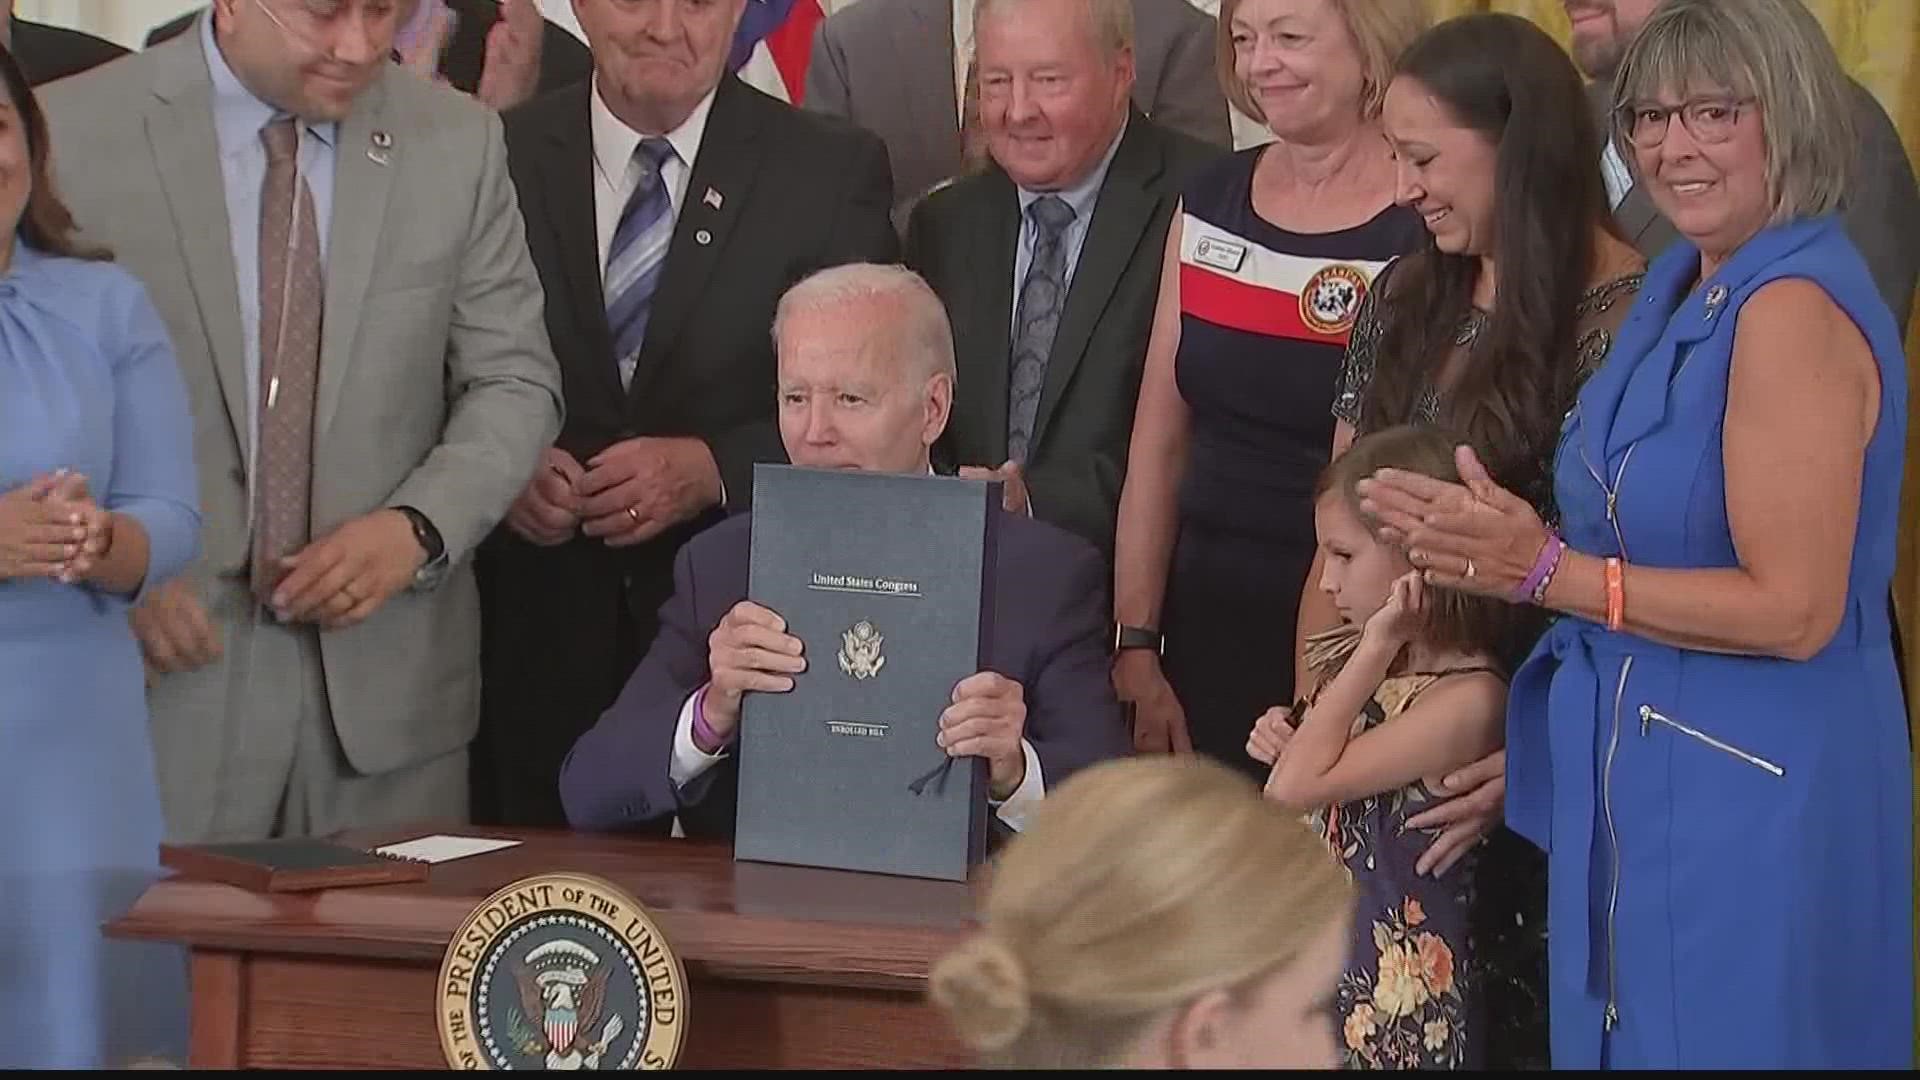 President Biden signed the act into law Aug. 10, increasing access to healthcare for veterans.